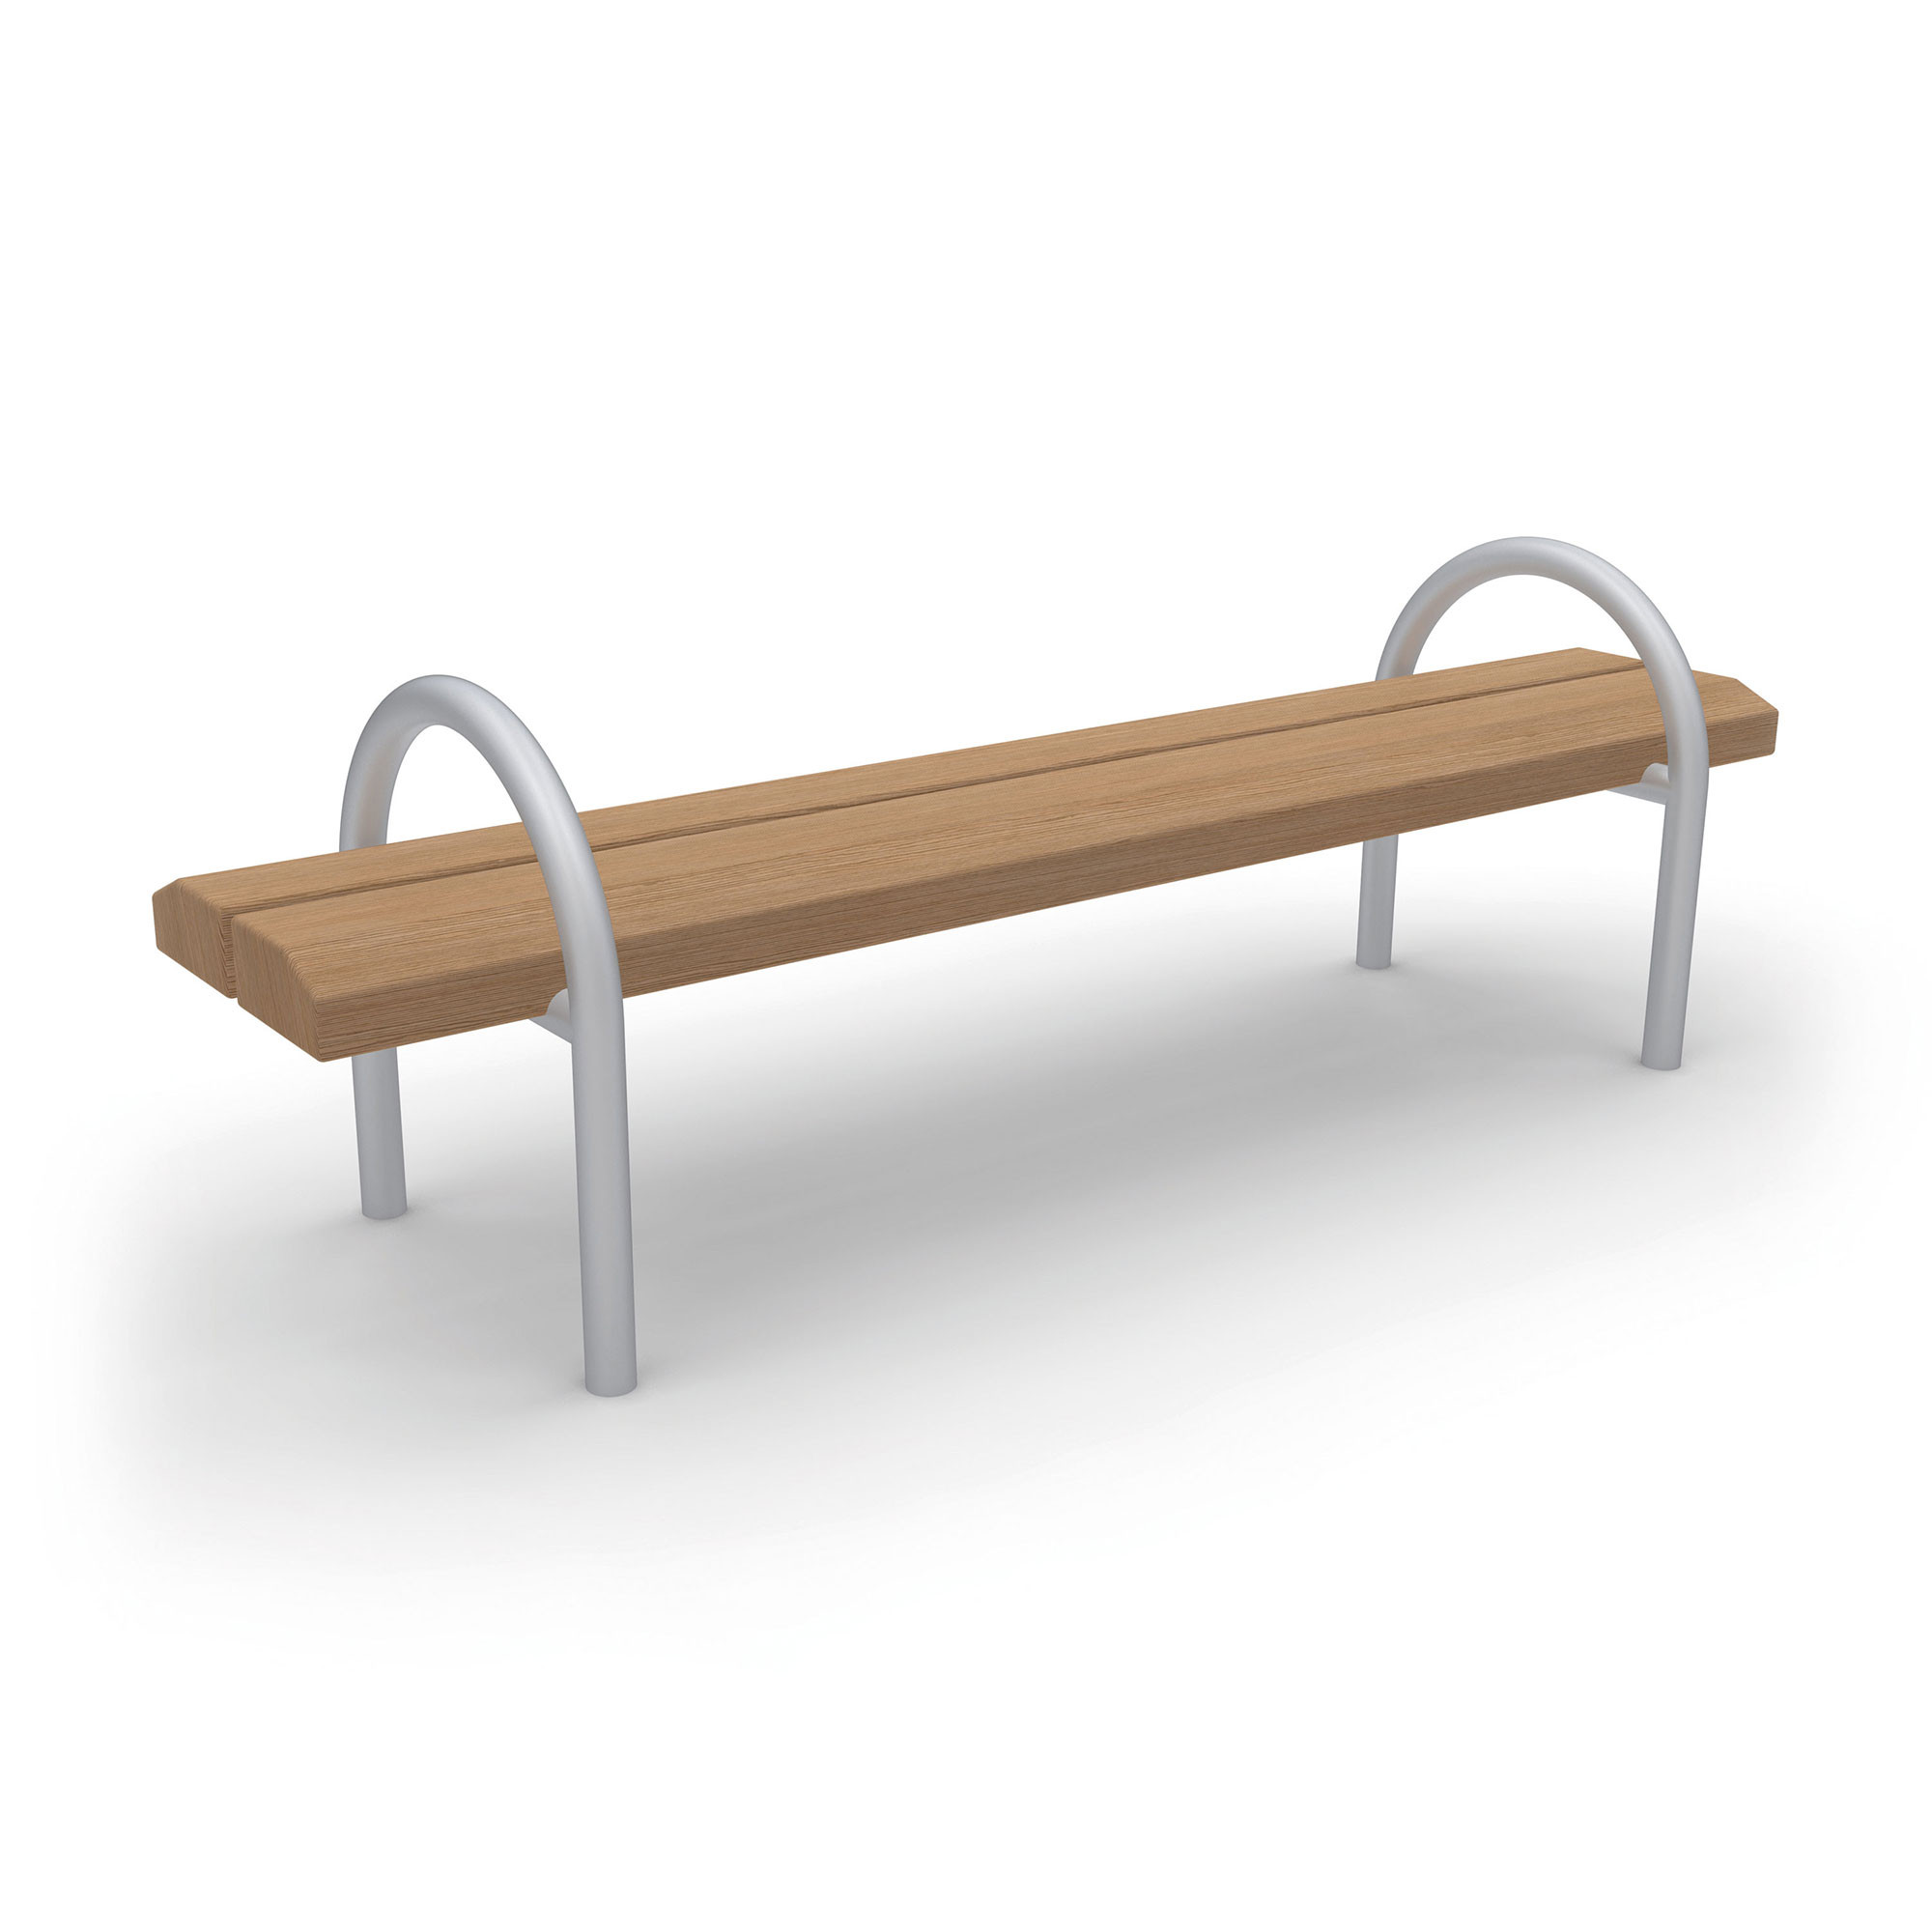 Swansea Backless Bench